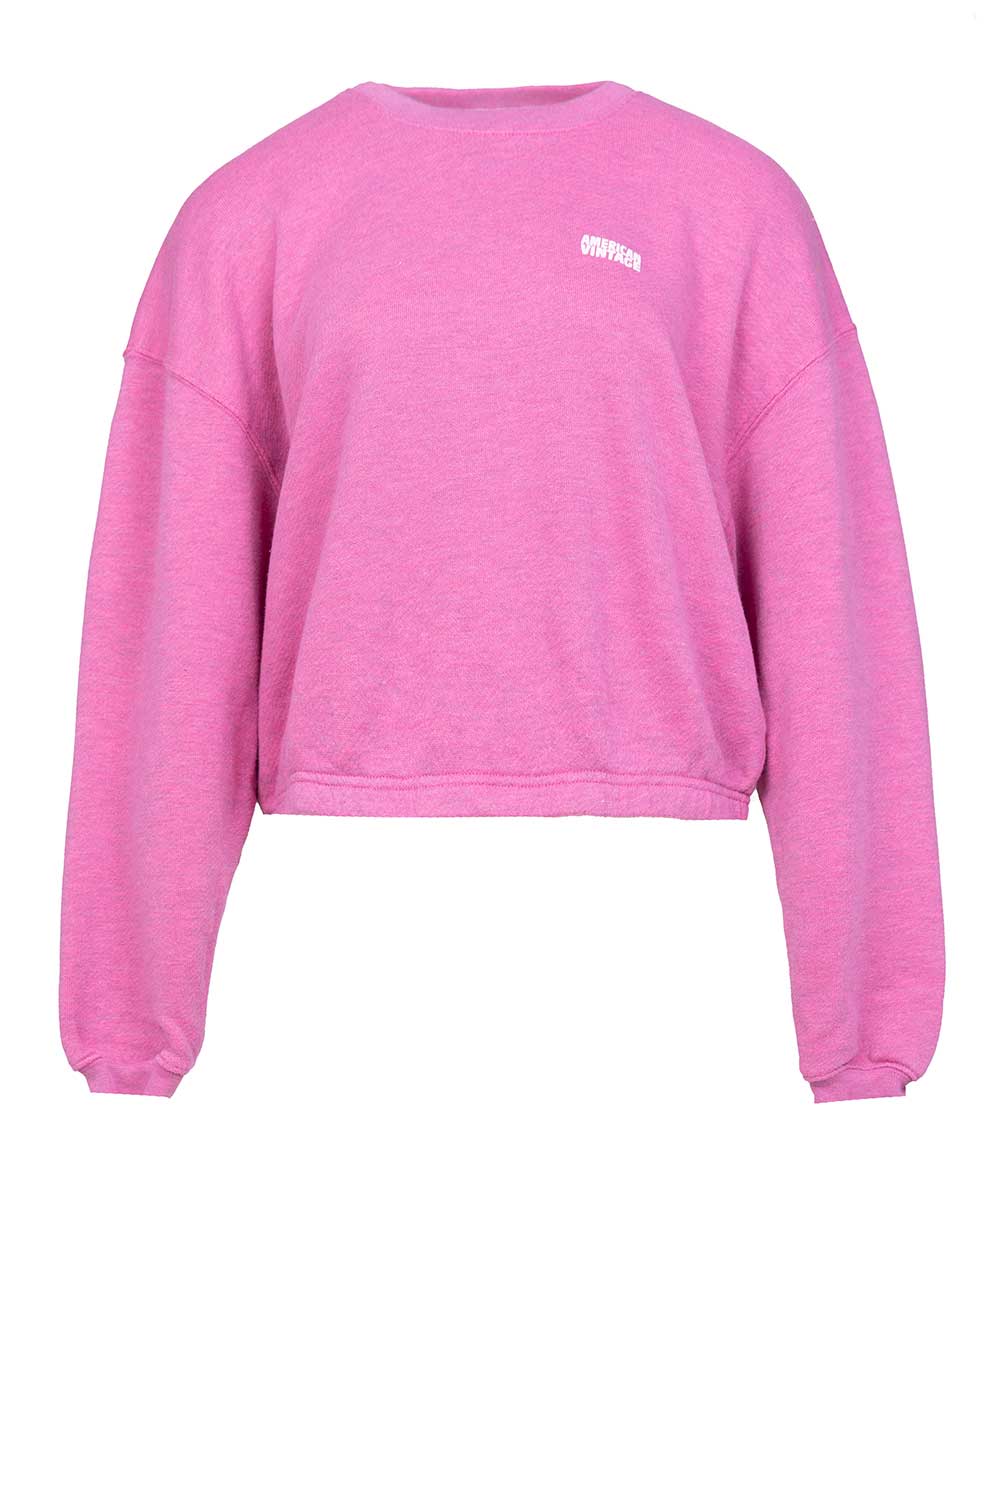 American vintage Washed sweater Doven roze